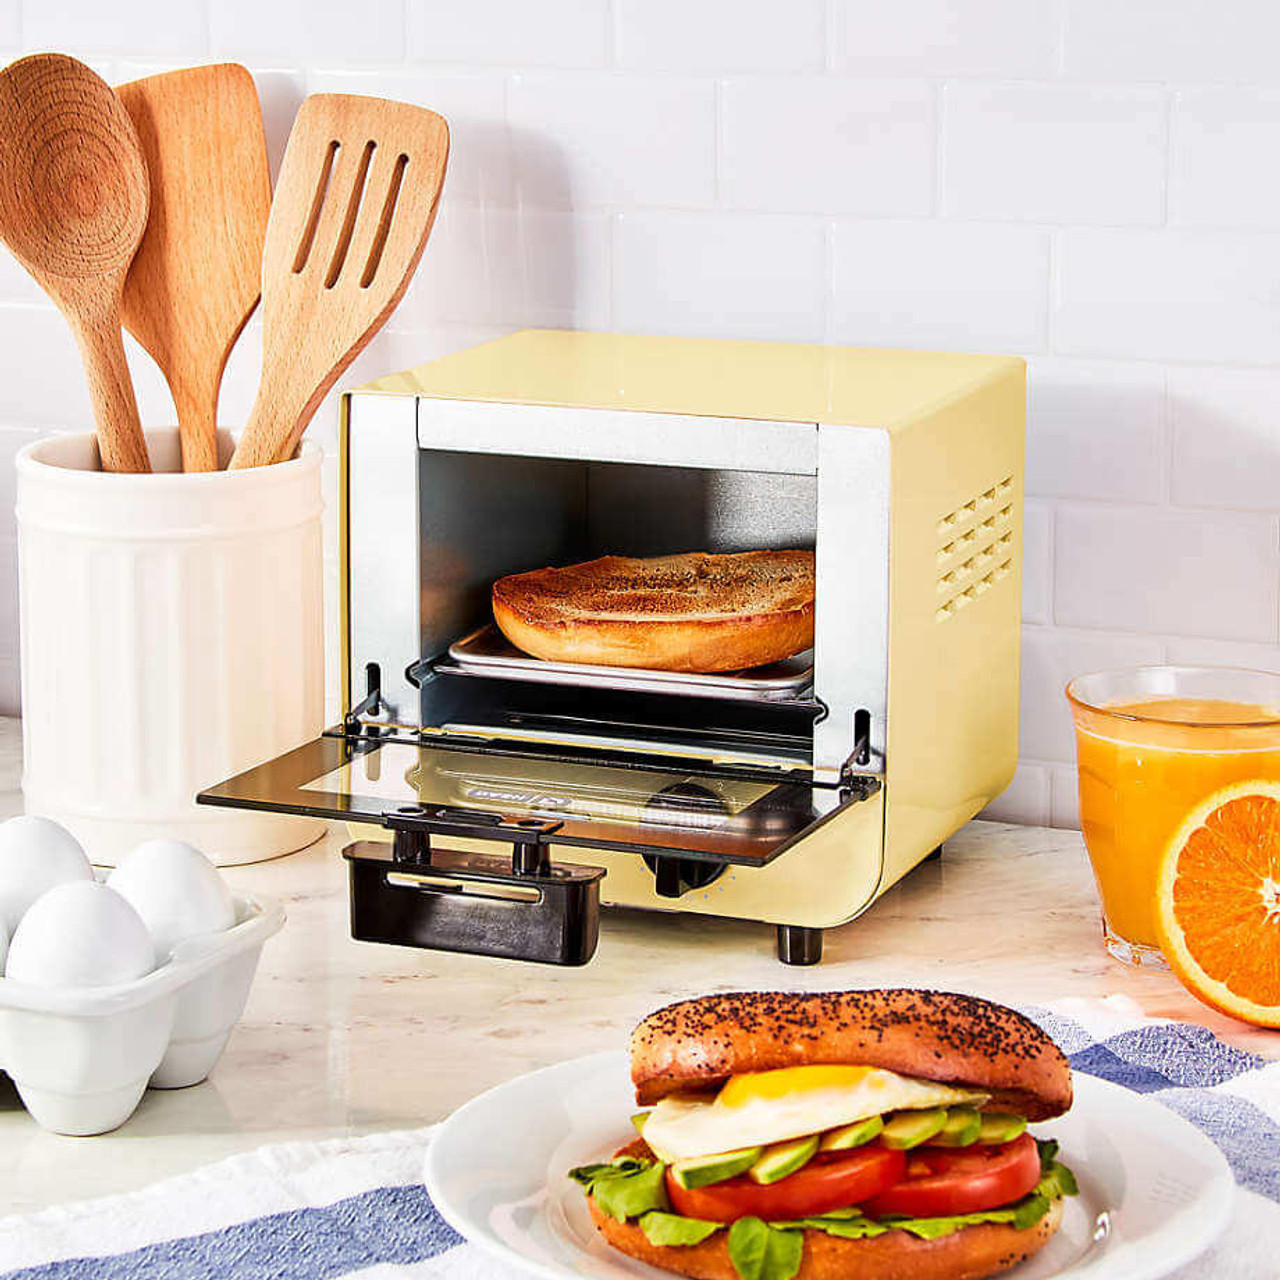 https://cdn11.bigcommerce.com/s-g5ygv2at8j/images/stencil/1280x1280/products/13929/31463/dash-dash-mini-countertop-toaster-oven-7.2-x-6.3-x-7.7-3.2-lbs__74255.1689644641.jpg?c=1